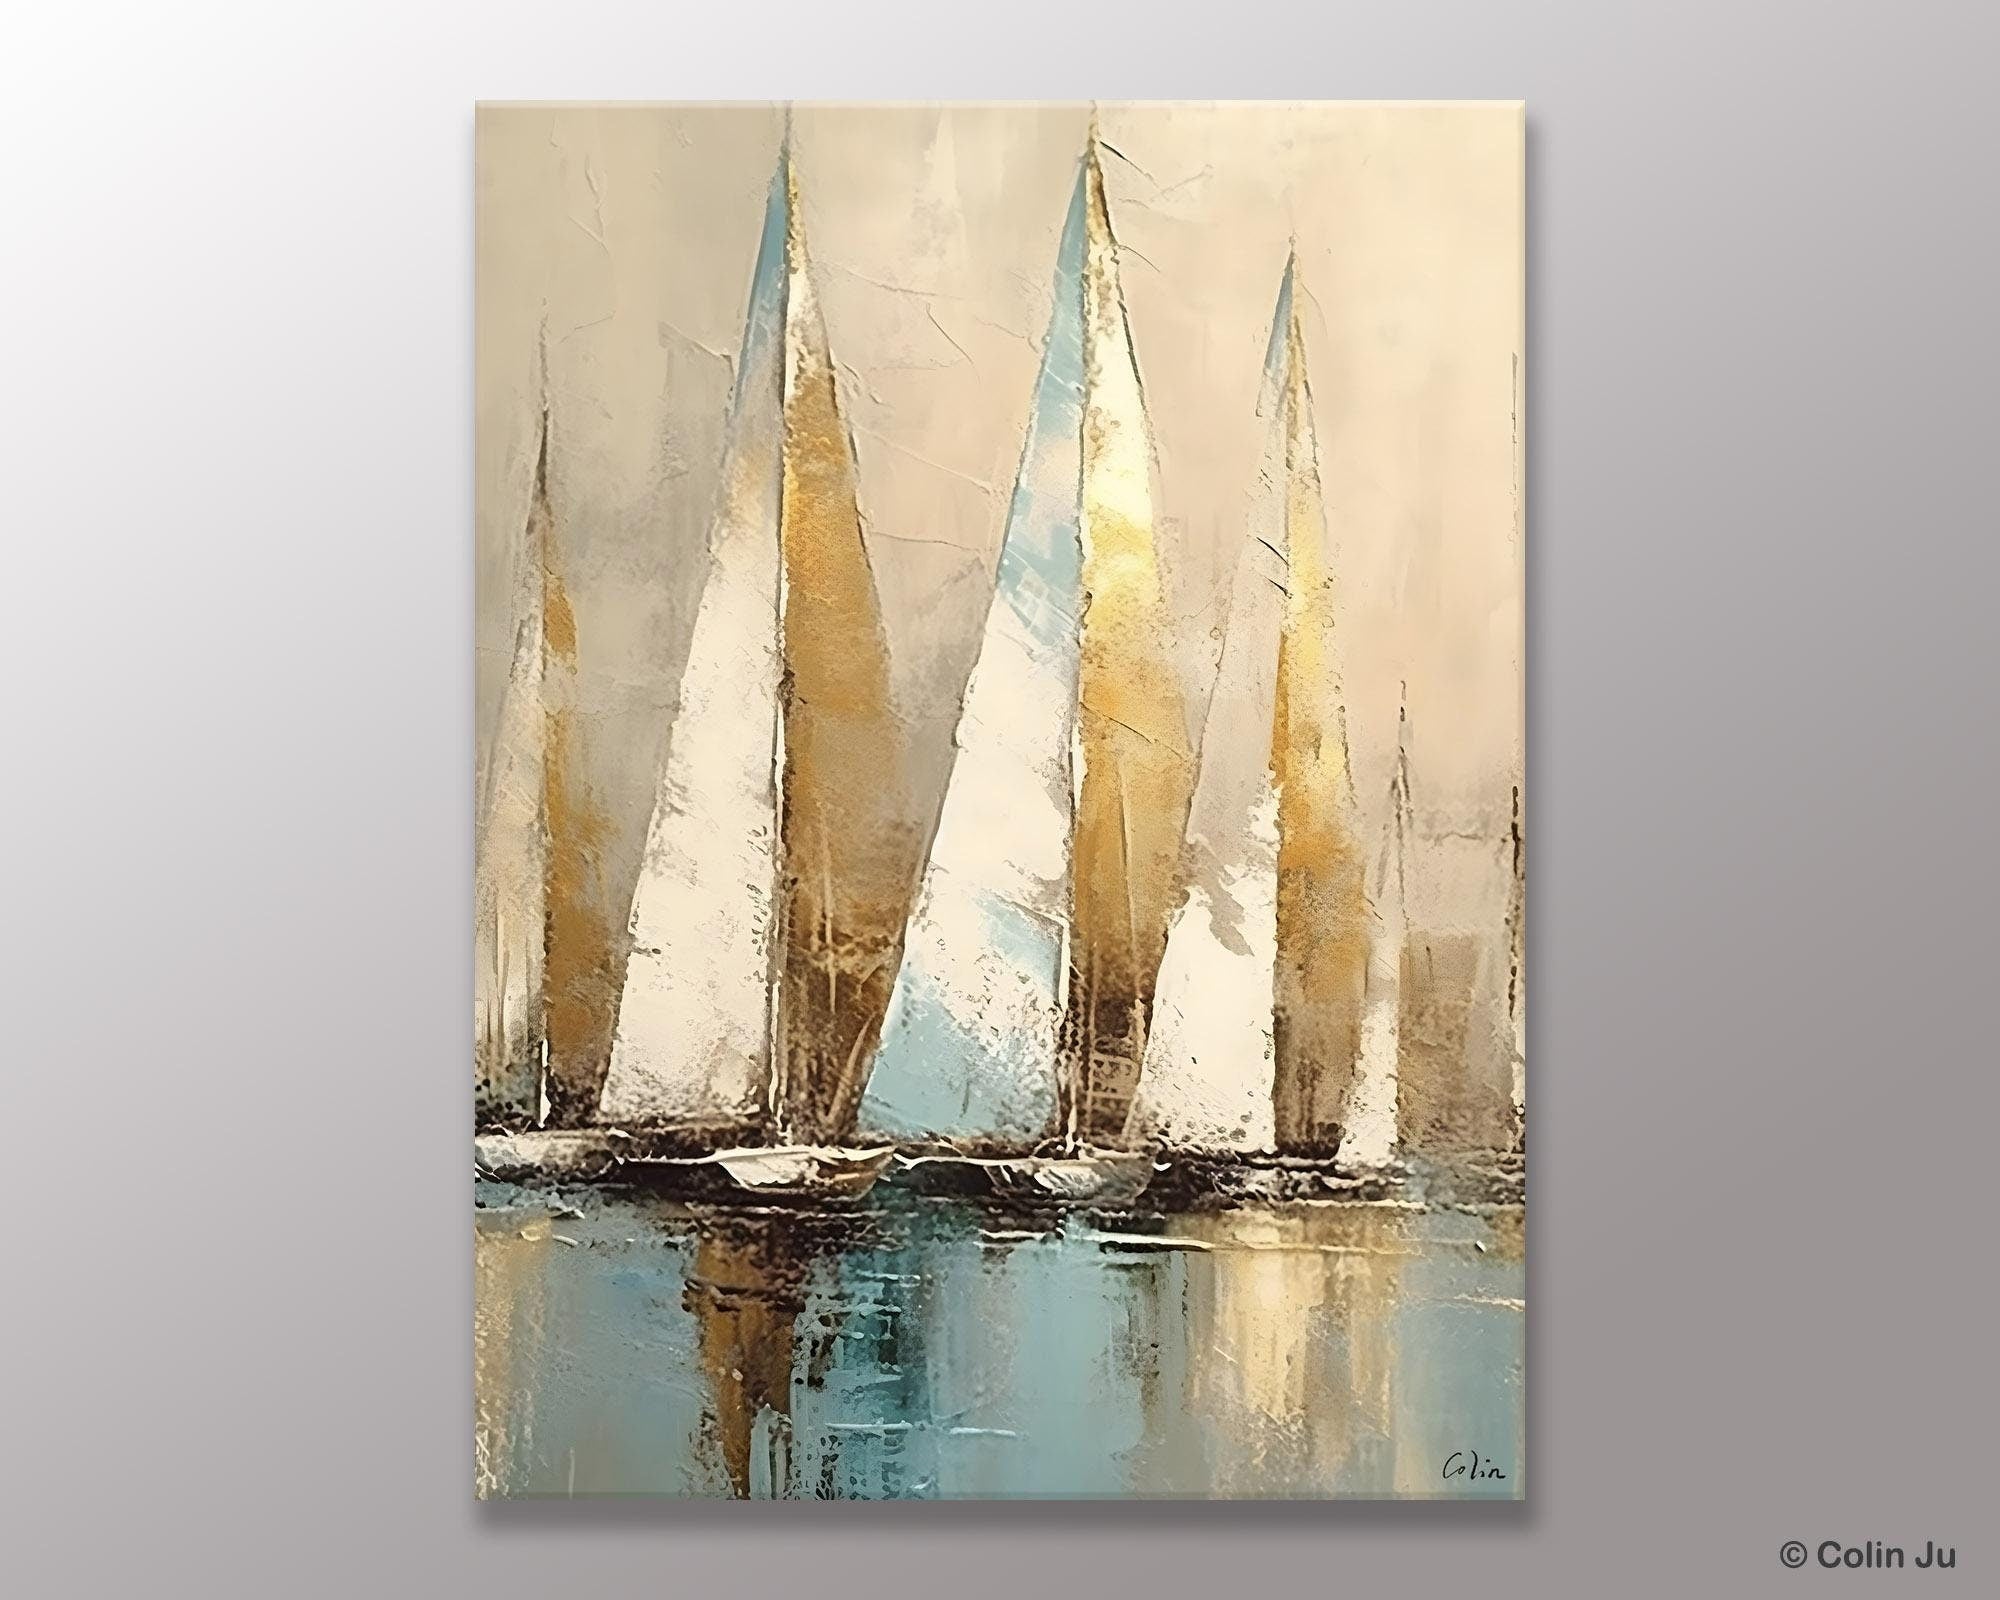 Sail Boat Abstract Painting, Landscape Canvas Paintings for Dining Room, Acrylic Painting on Canvas, Original Landscape Abstract Painting-Grace Painting Crafts